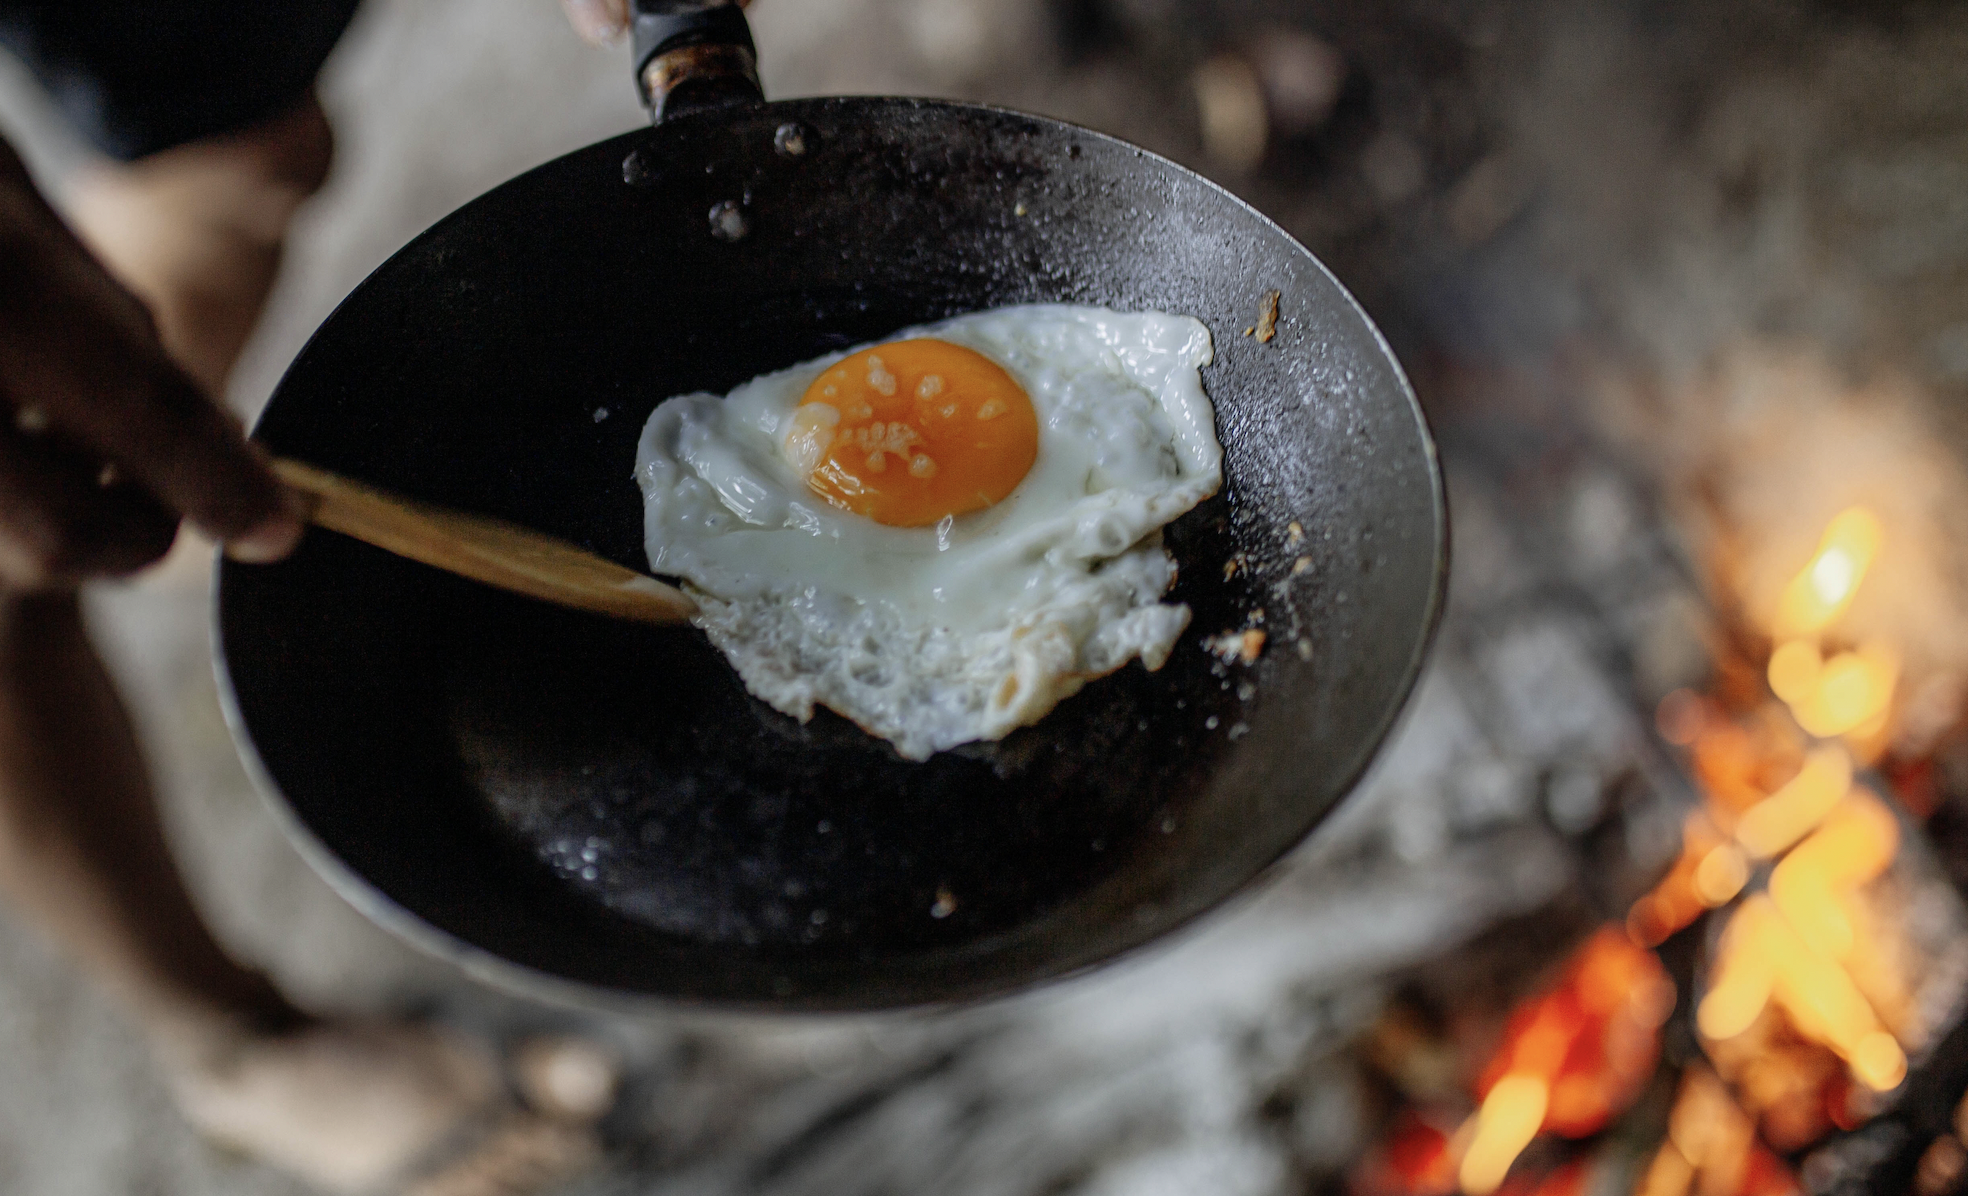 A person, barefoot, cooking an egg sunny-side up above an open flame